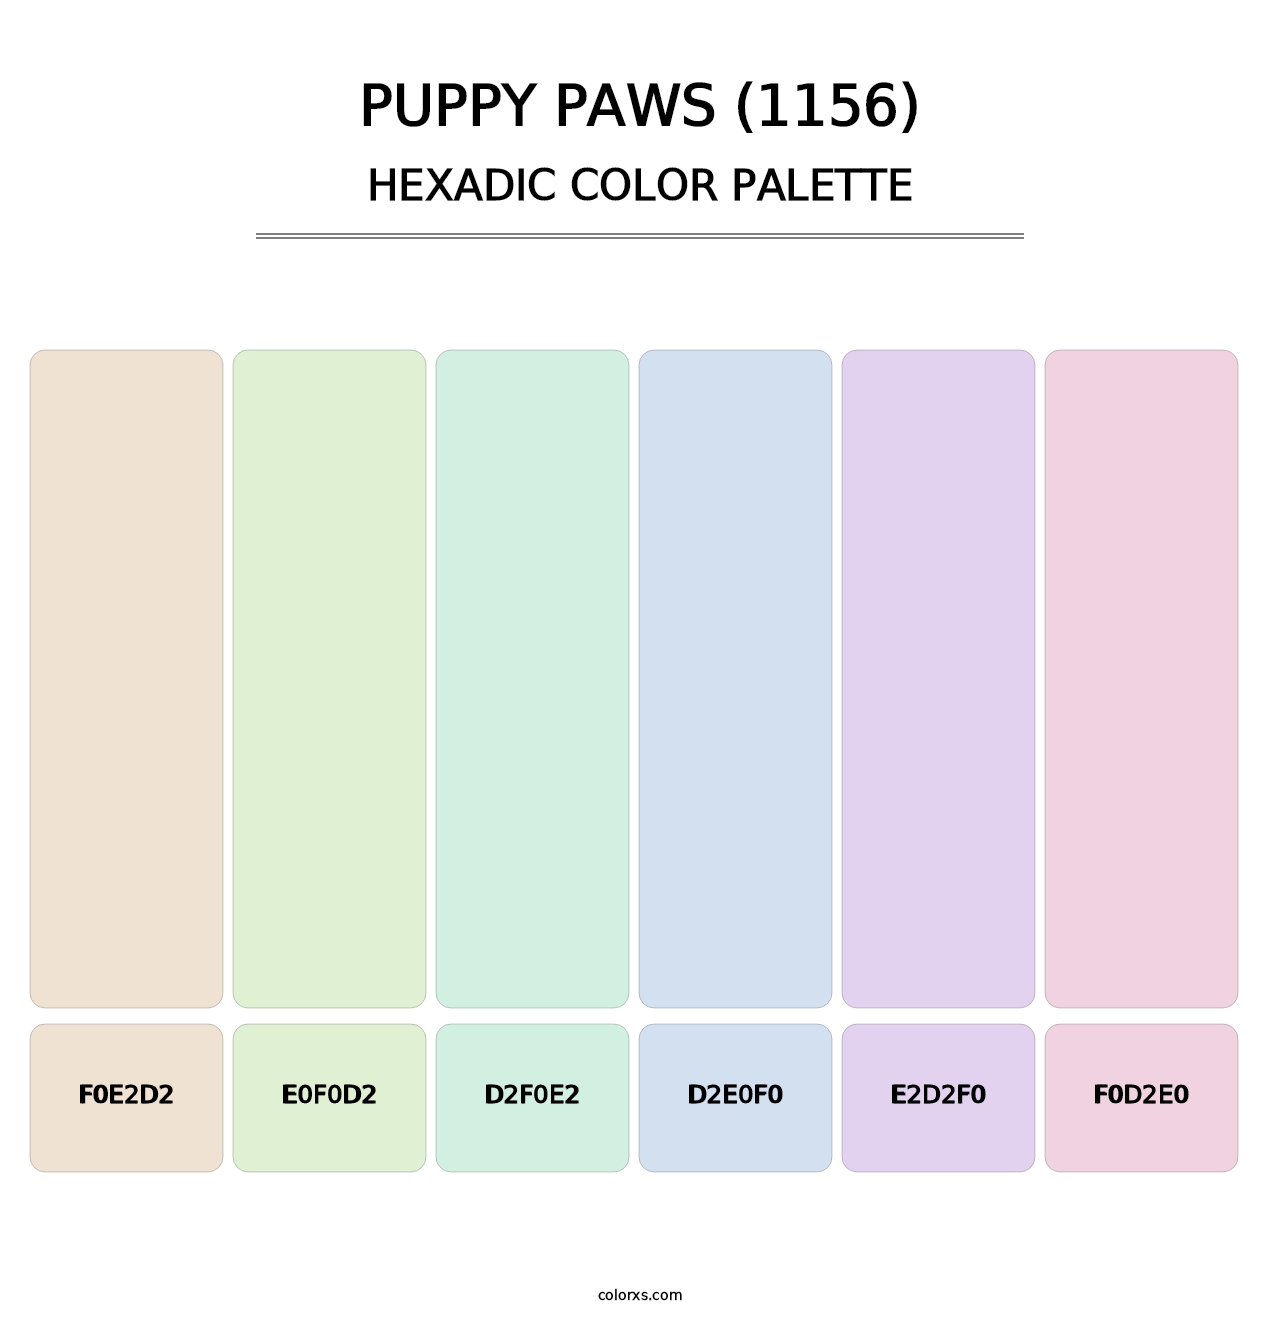 Puppy Paws (1156) - Hexadic Color Palette